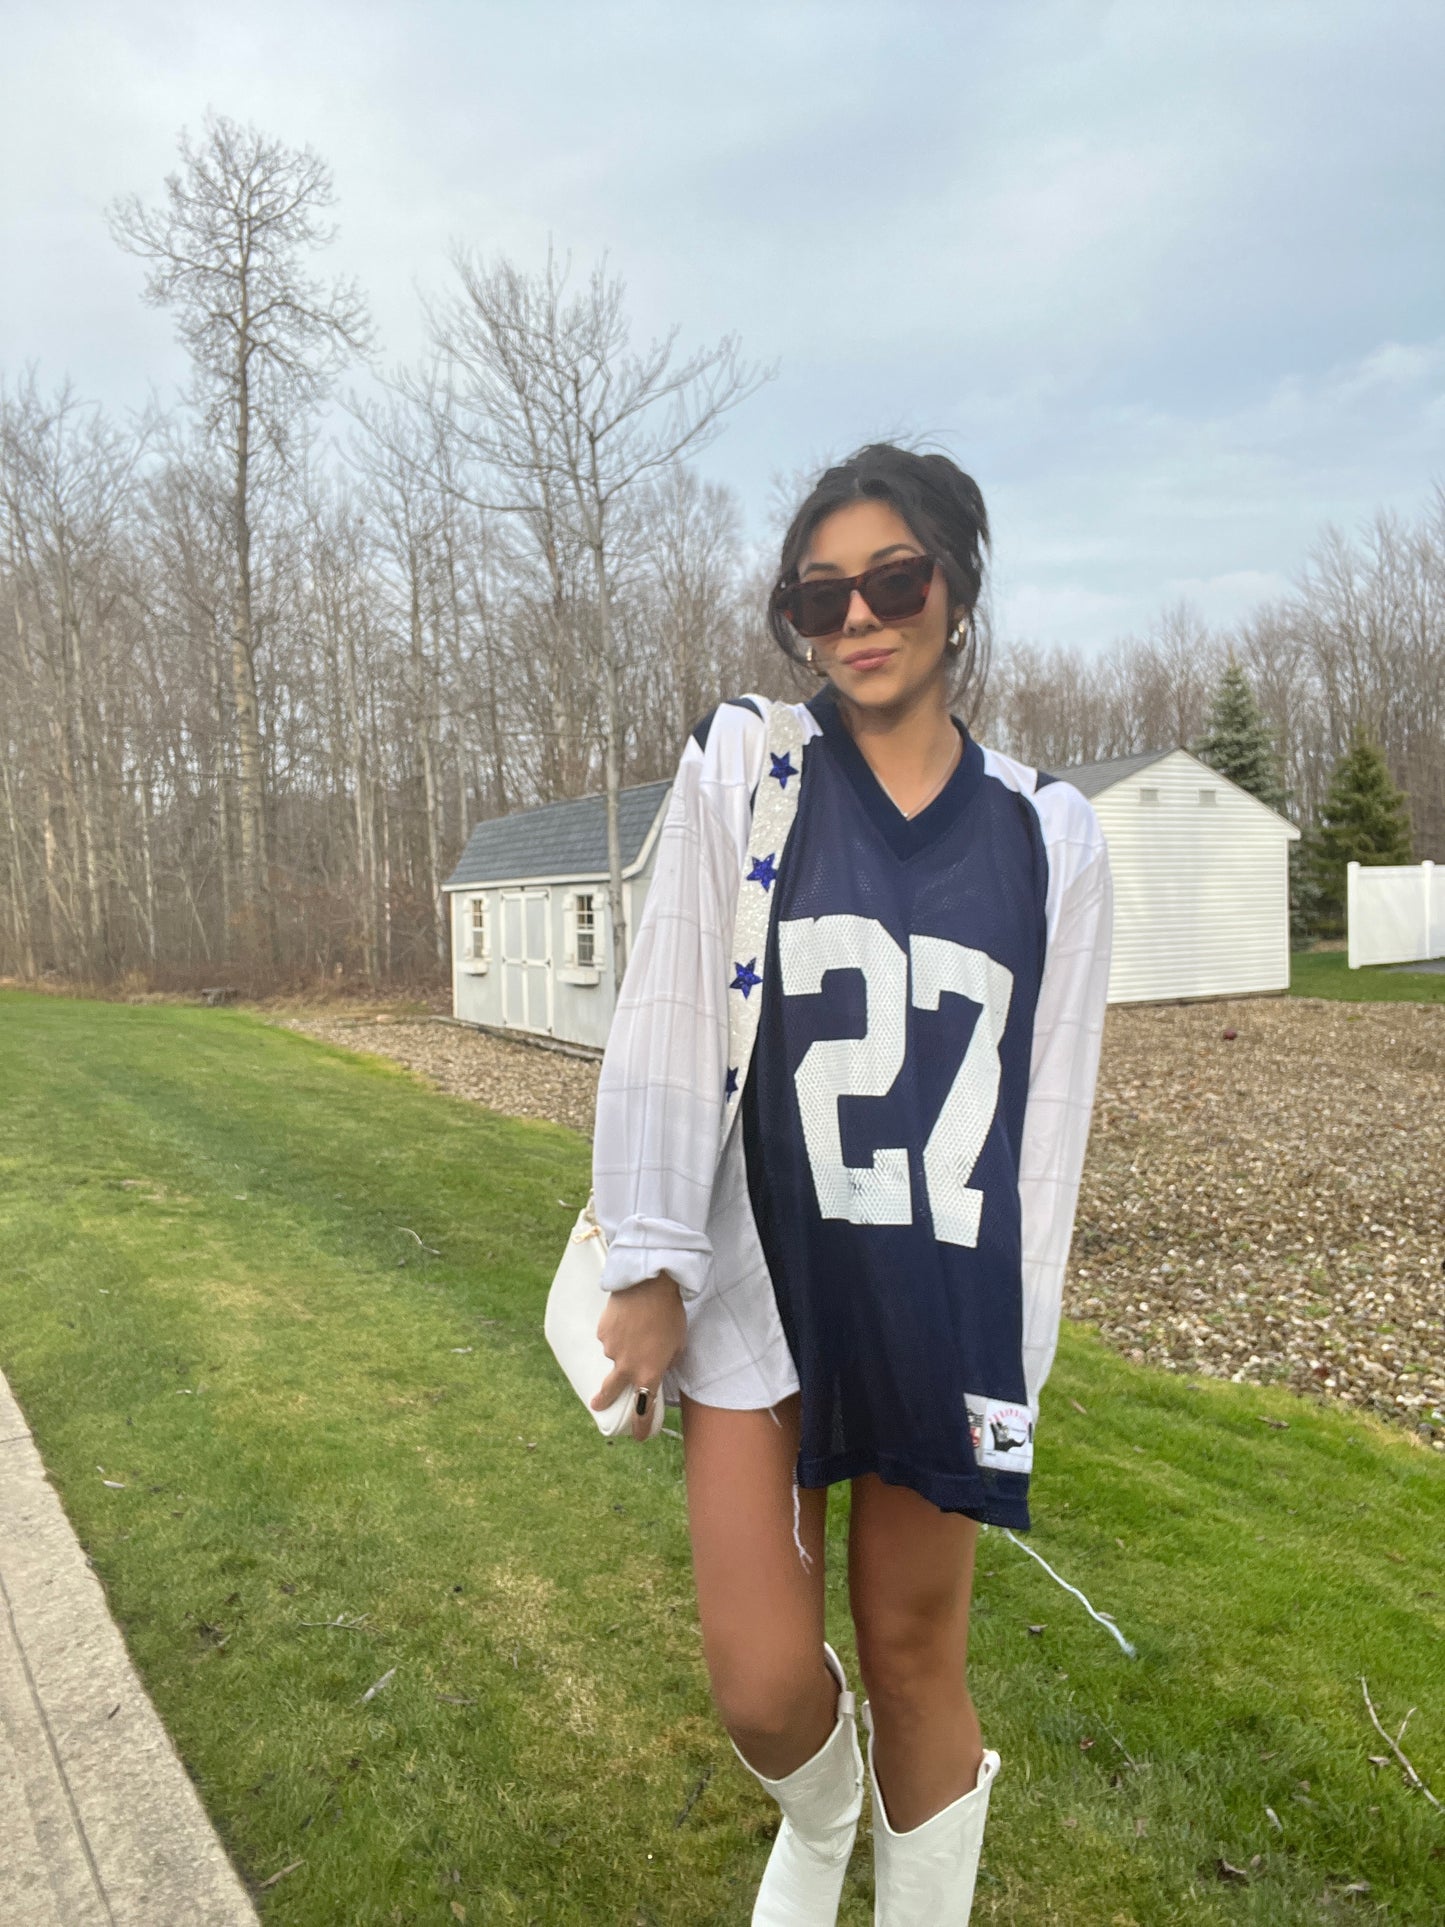 #27 GEORGE COWBOYS JERSEY X FLANNEL